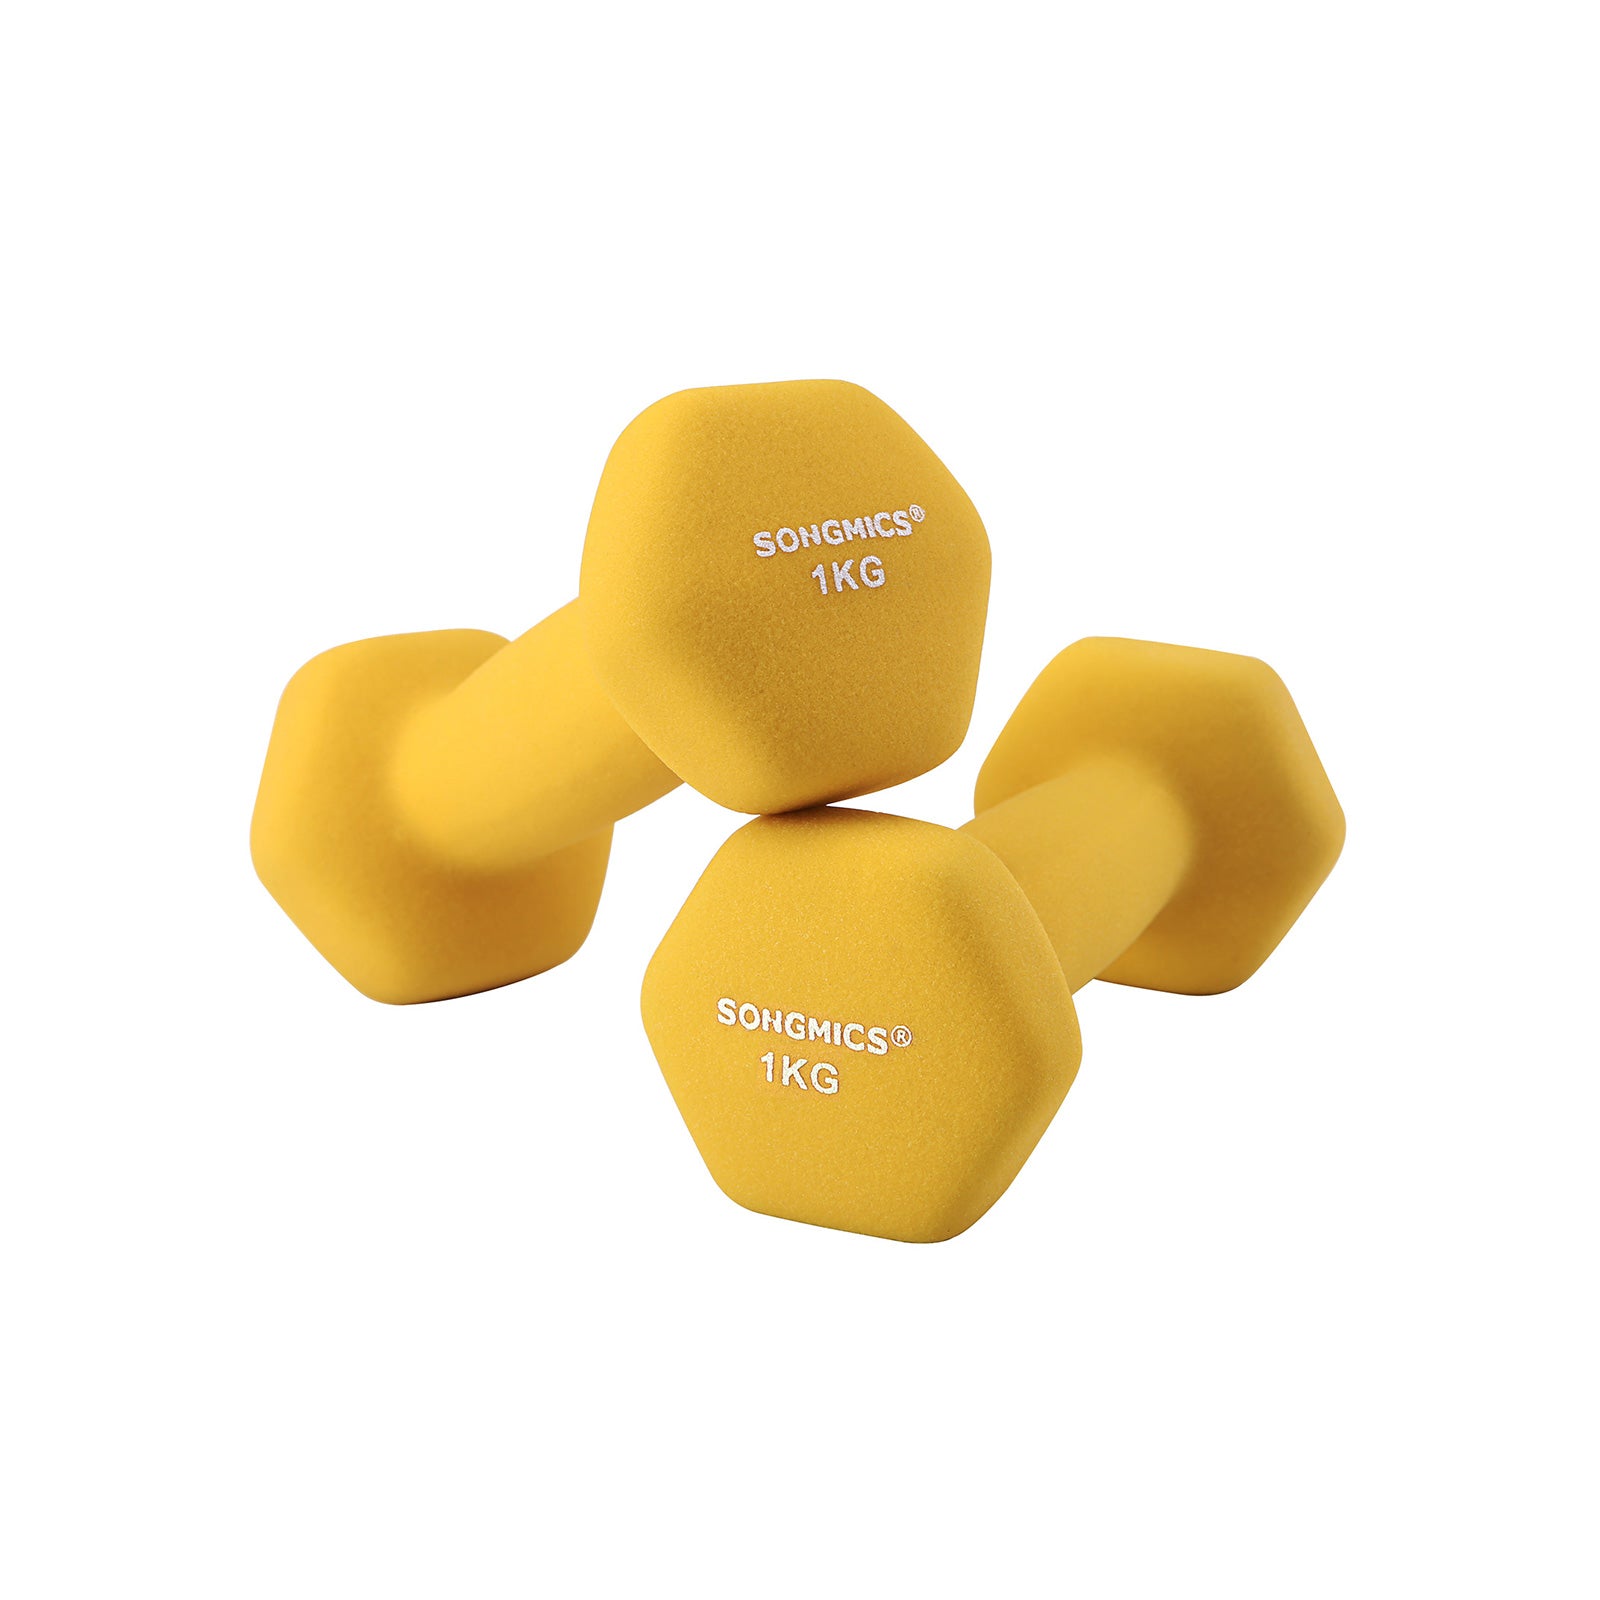 Image of Set of 2 Dumbbells Weights Vinyl Coating, All-purpose Home Gym Fitness Waterproof and Non-Slip with Matte Finish, Yellow 2 x 1 kg SYL62YL - Songmics